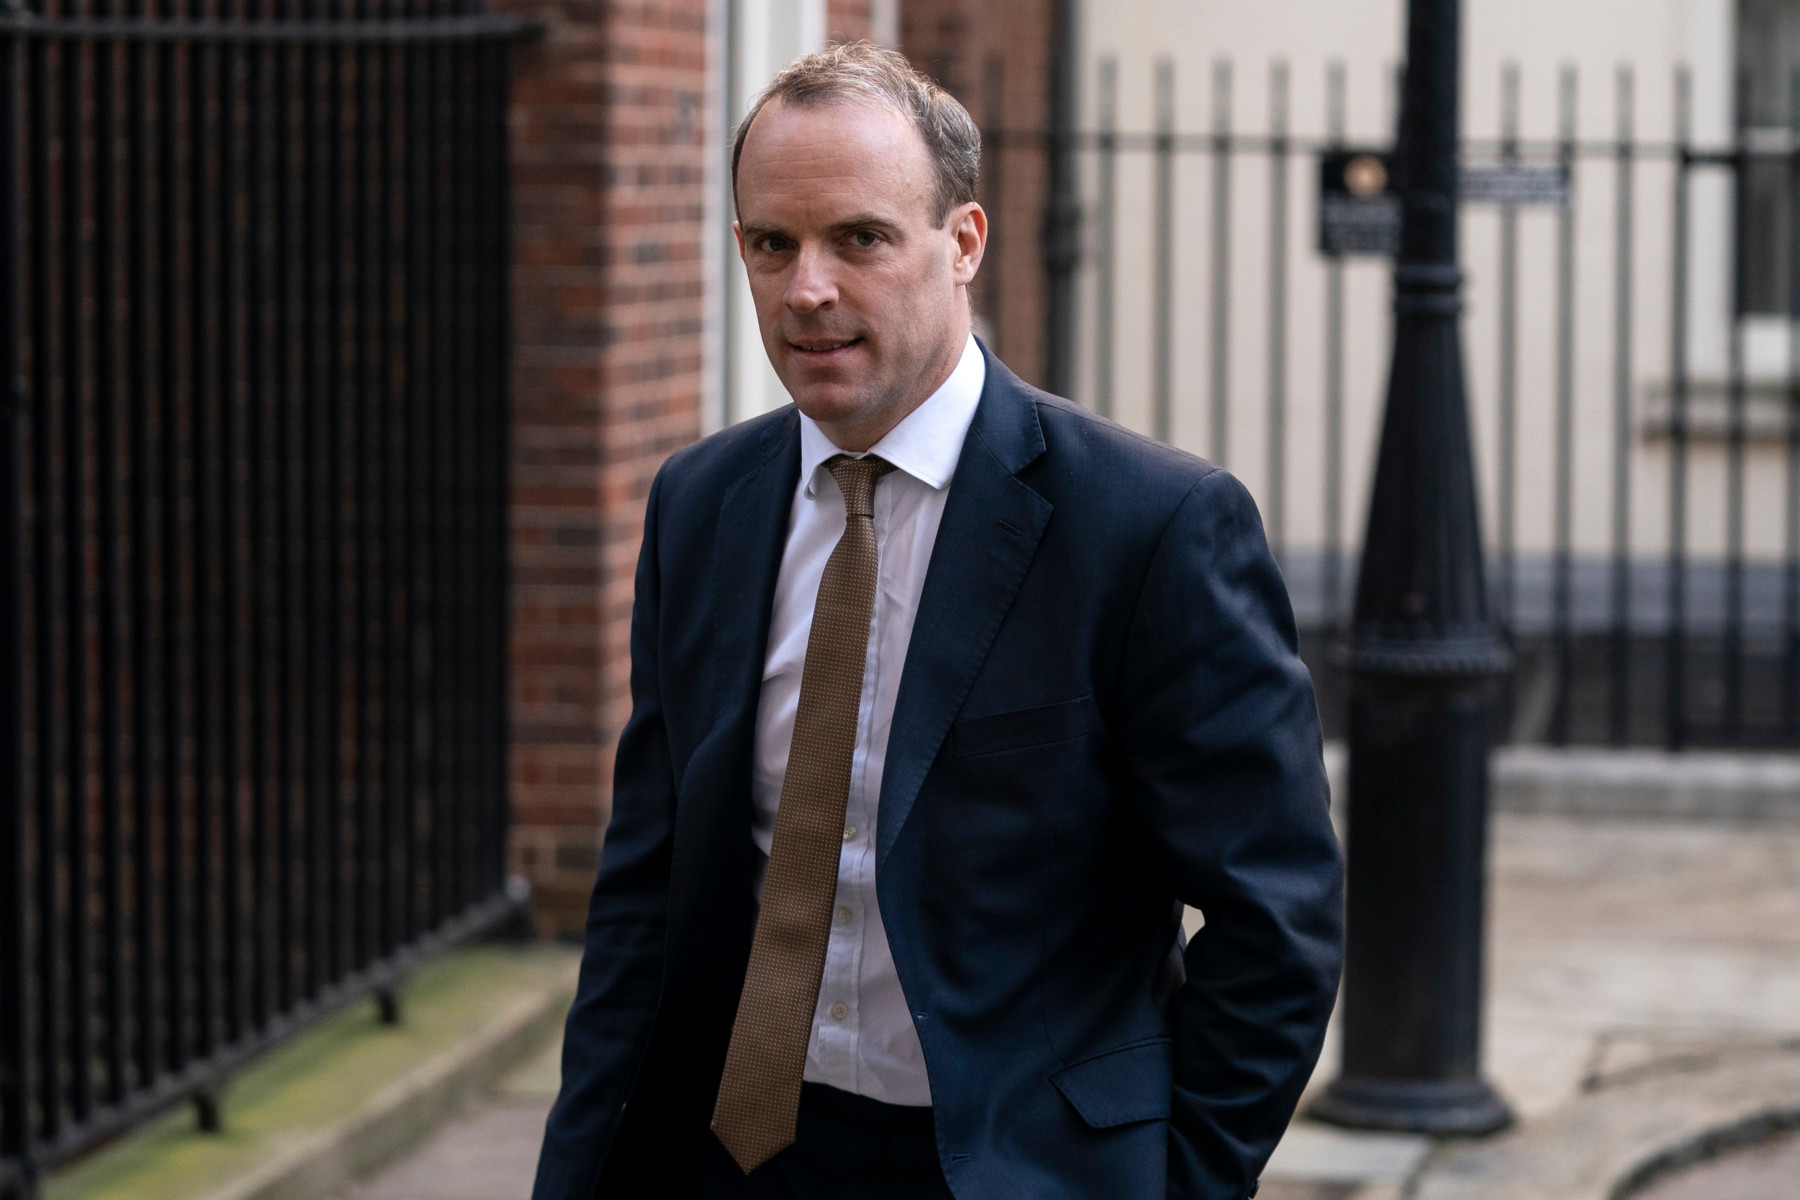 Dominic Raab will take charge of Britain if the PM is struck down with coronavirus